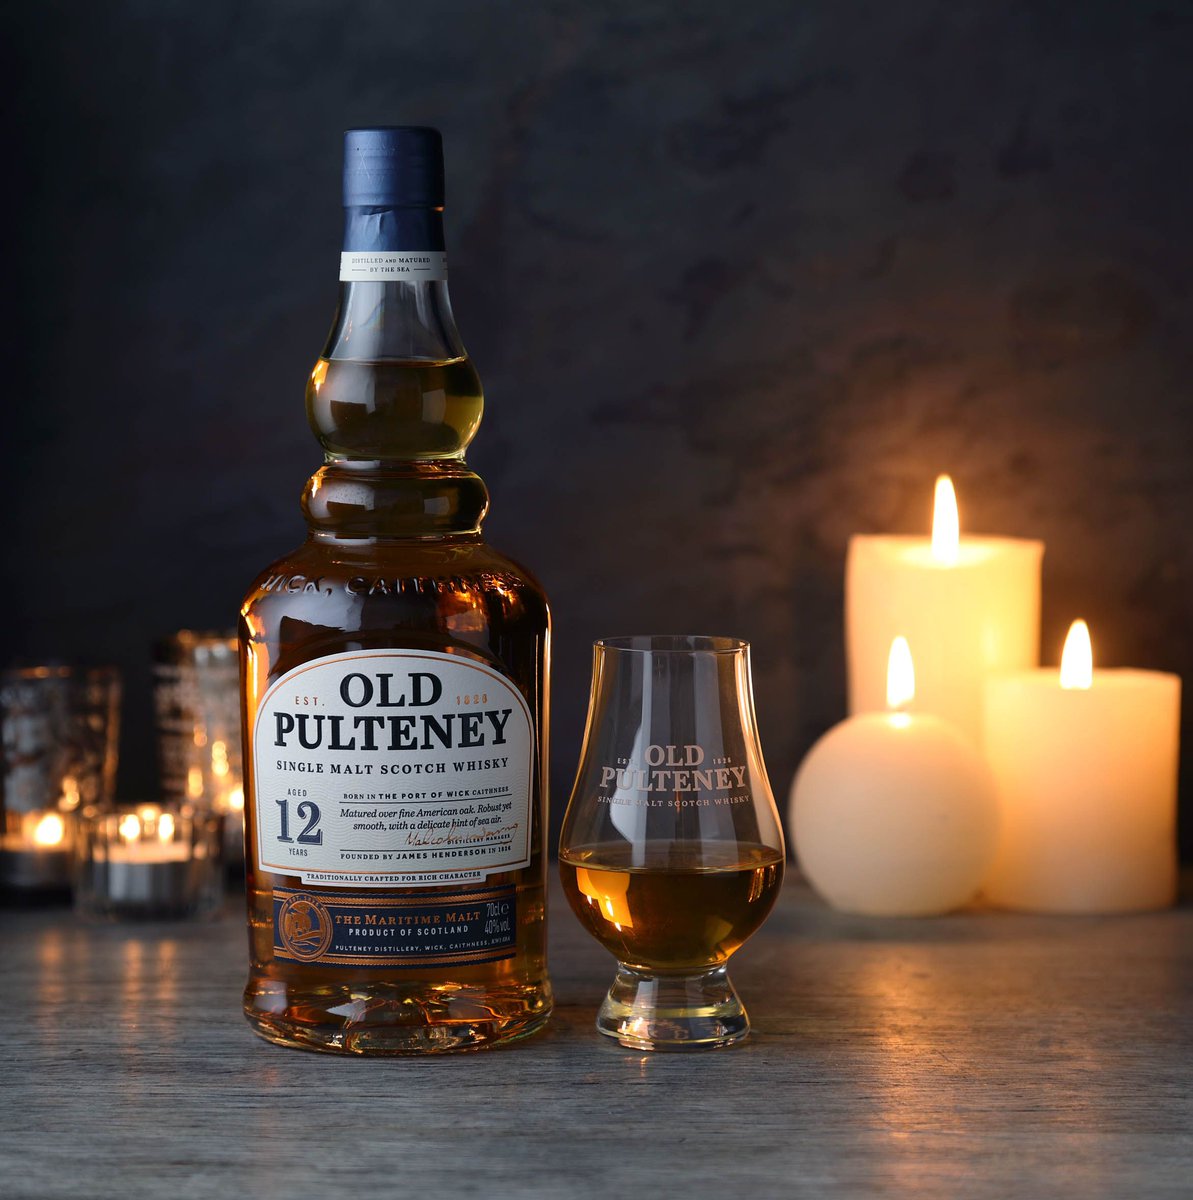 Ready for the week ahead and capping the weekend off right with a dram of @OldPulteneyMalt 

#OldPulteney #Scotch #Whisky #Whiskey #Dram #WhiskySunday #YVRBartender #YYCBartender #YEGBartender #WPGBartender #HomeBartender